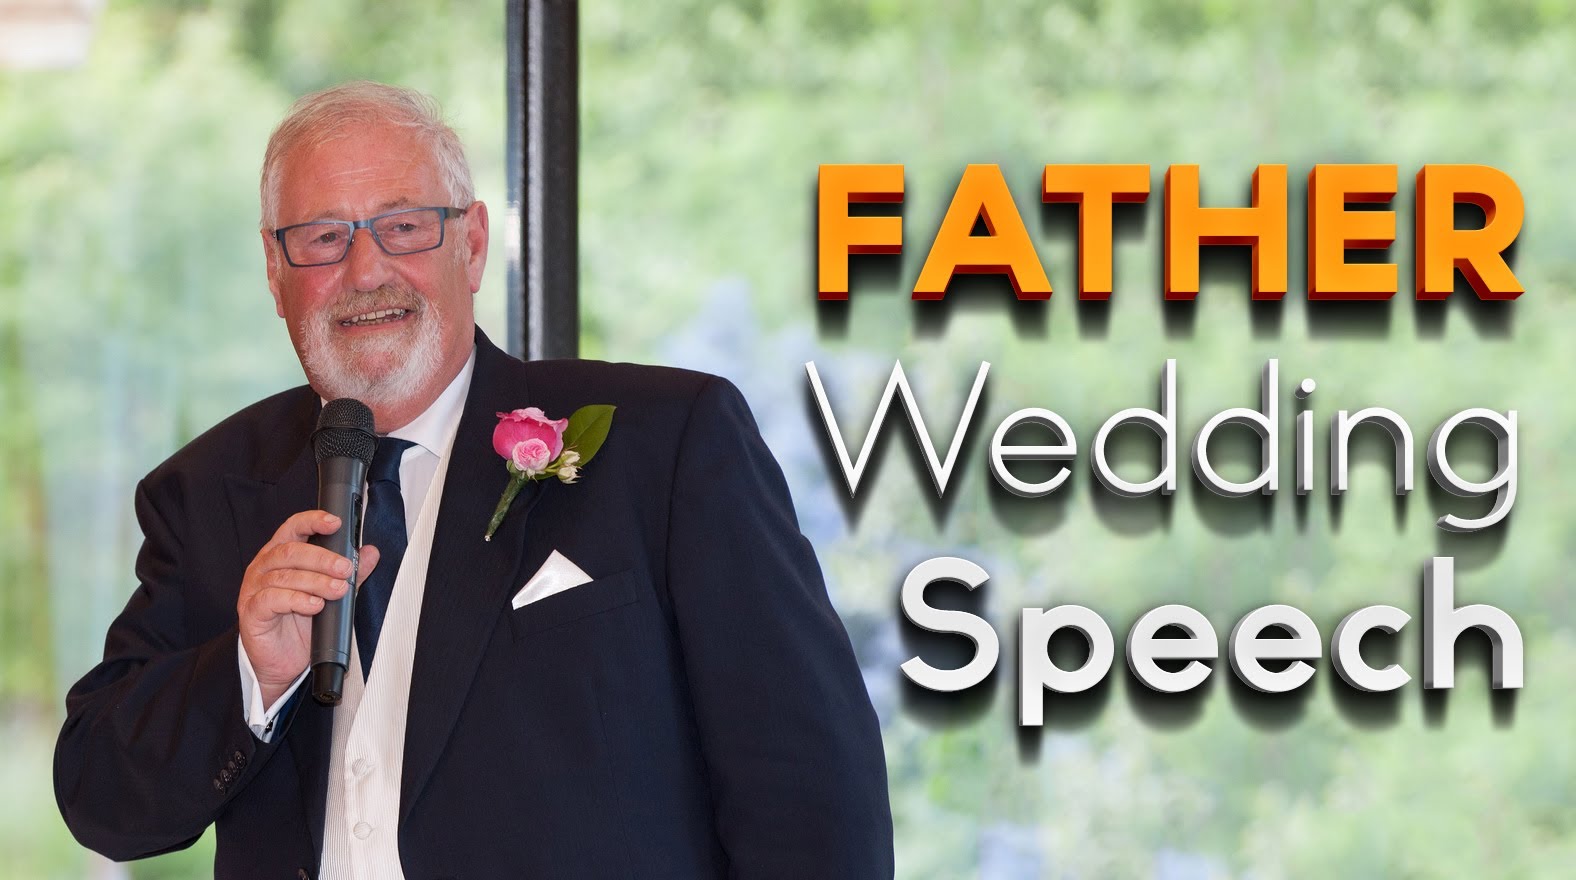 Father Wedding Speech – Ideas For Wedding Speeches and Toasts